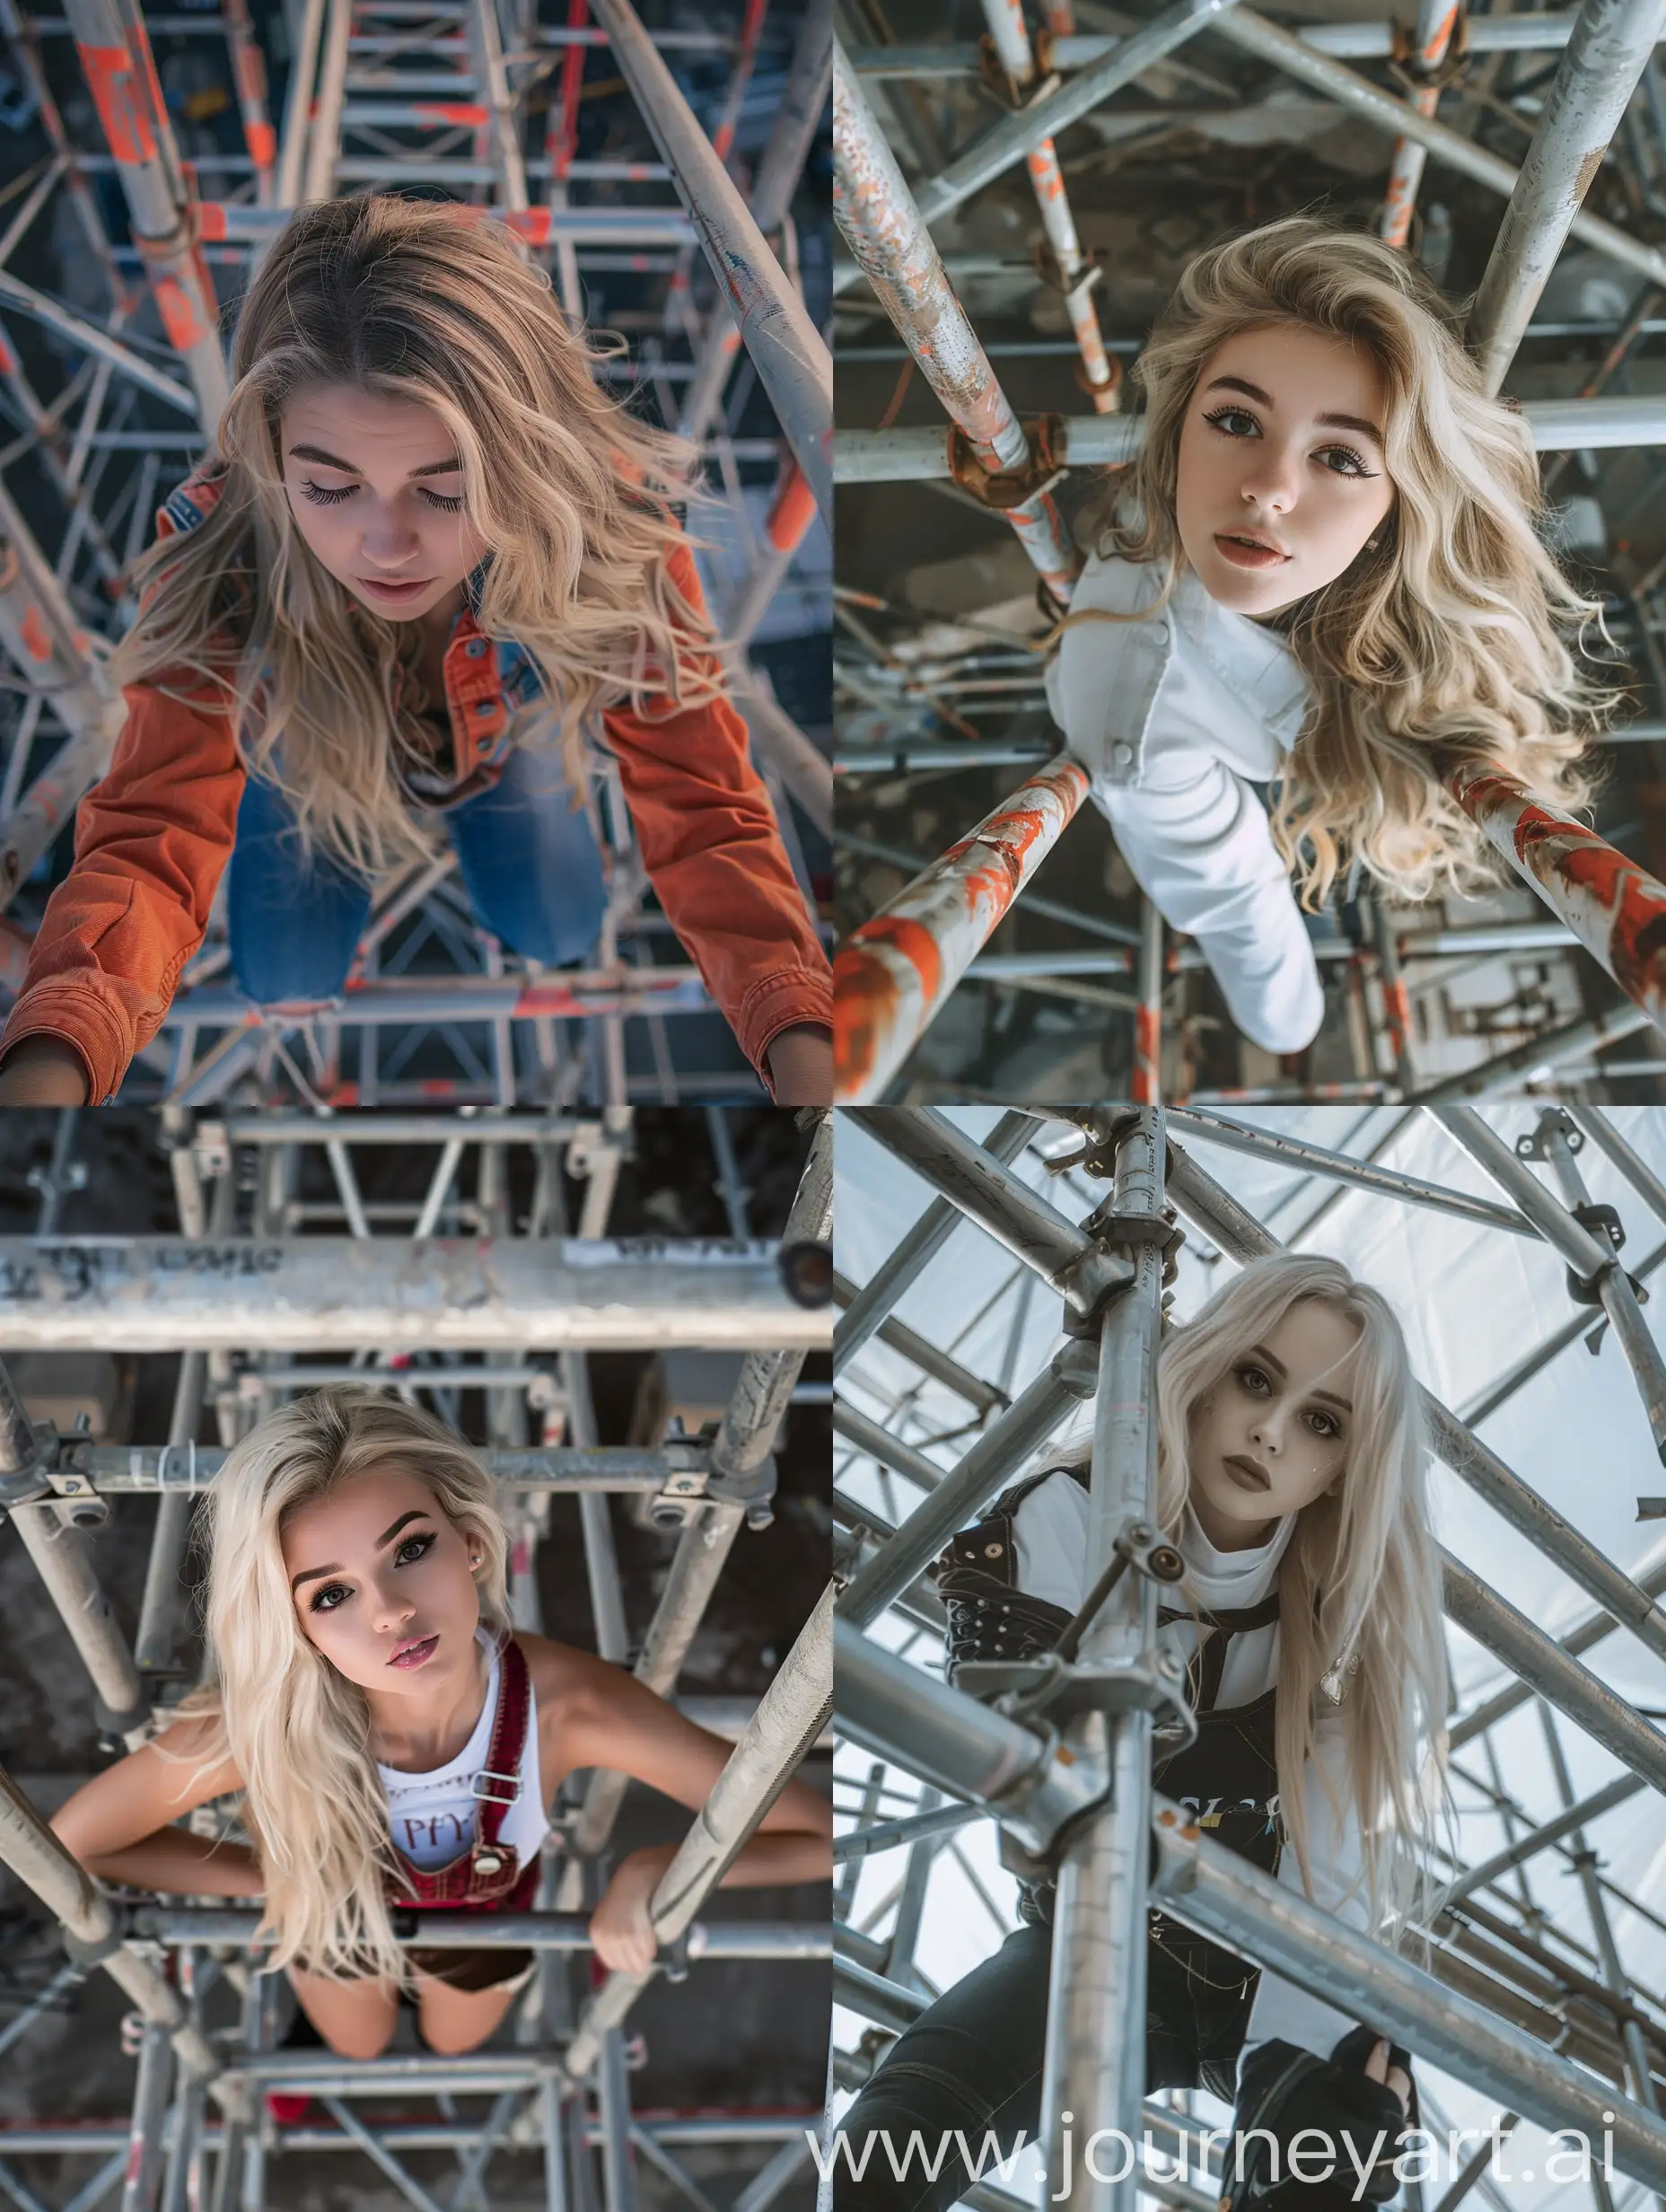 1 girl, long blond hair, 18 years old, influencer, beauty,   cheerleader, makeup, down view, , down view,  4k, , is working on a steel scaffold under construction